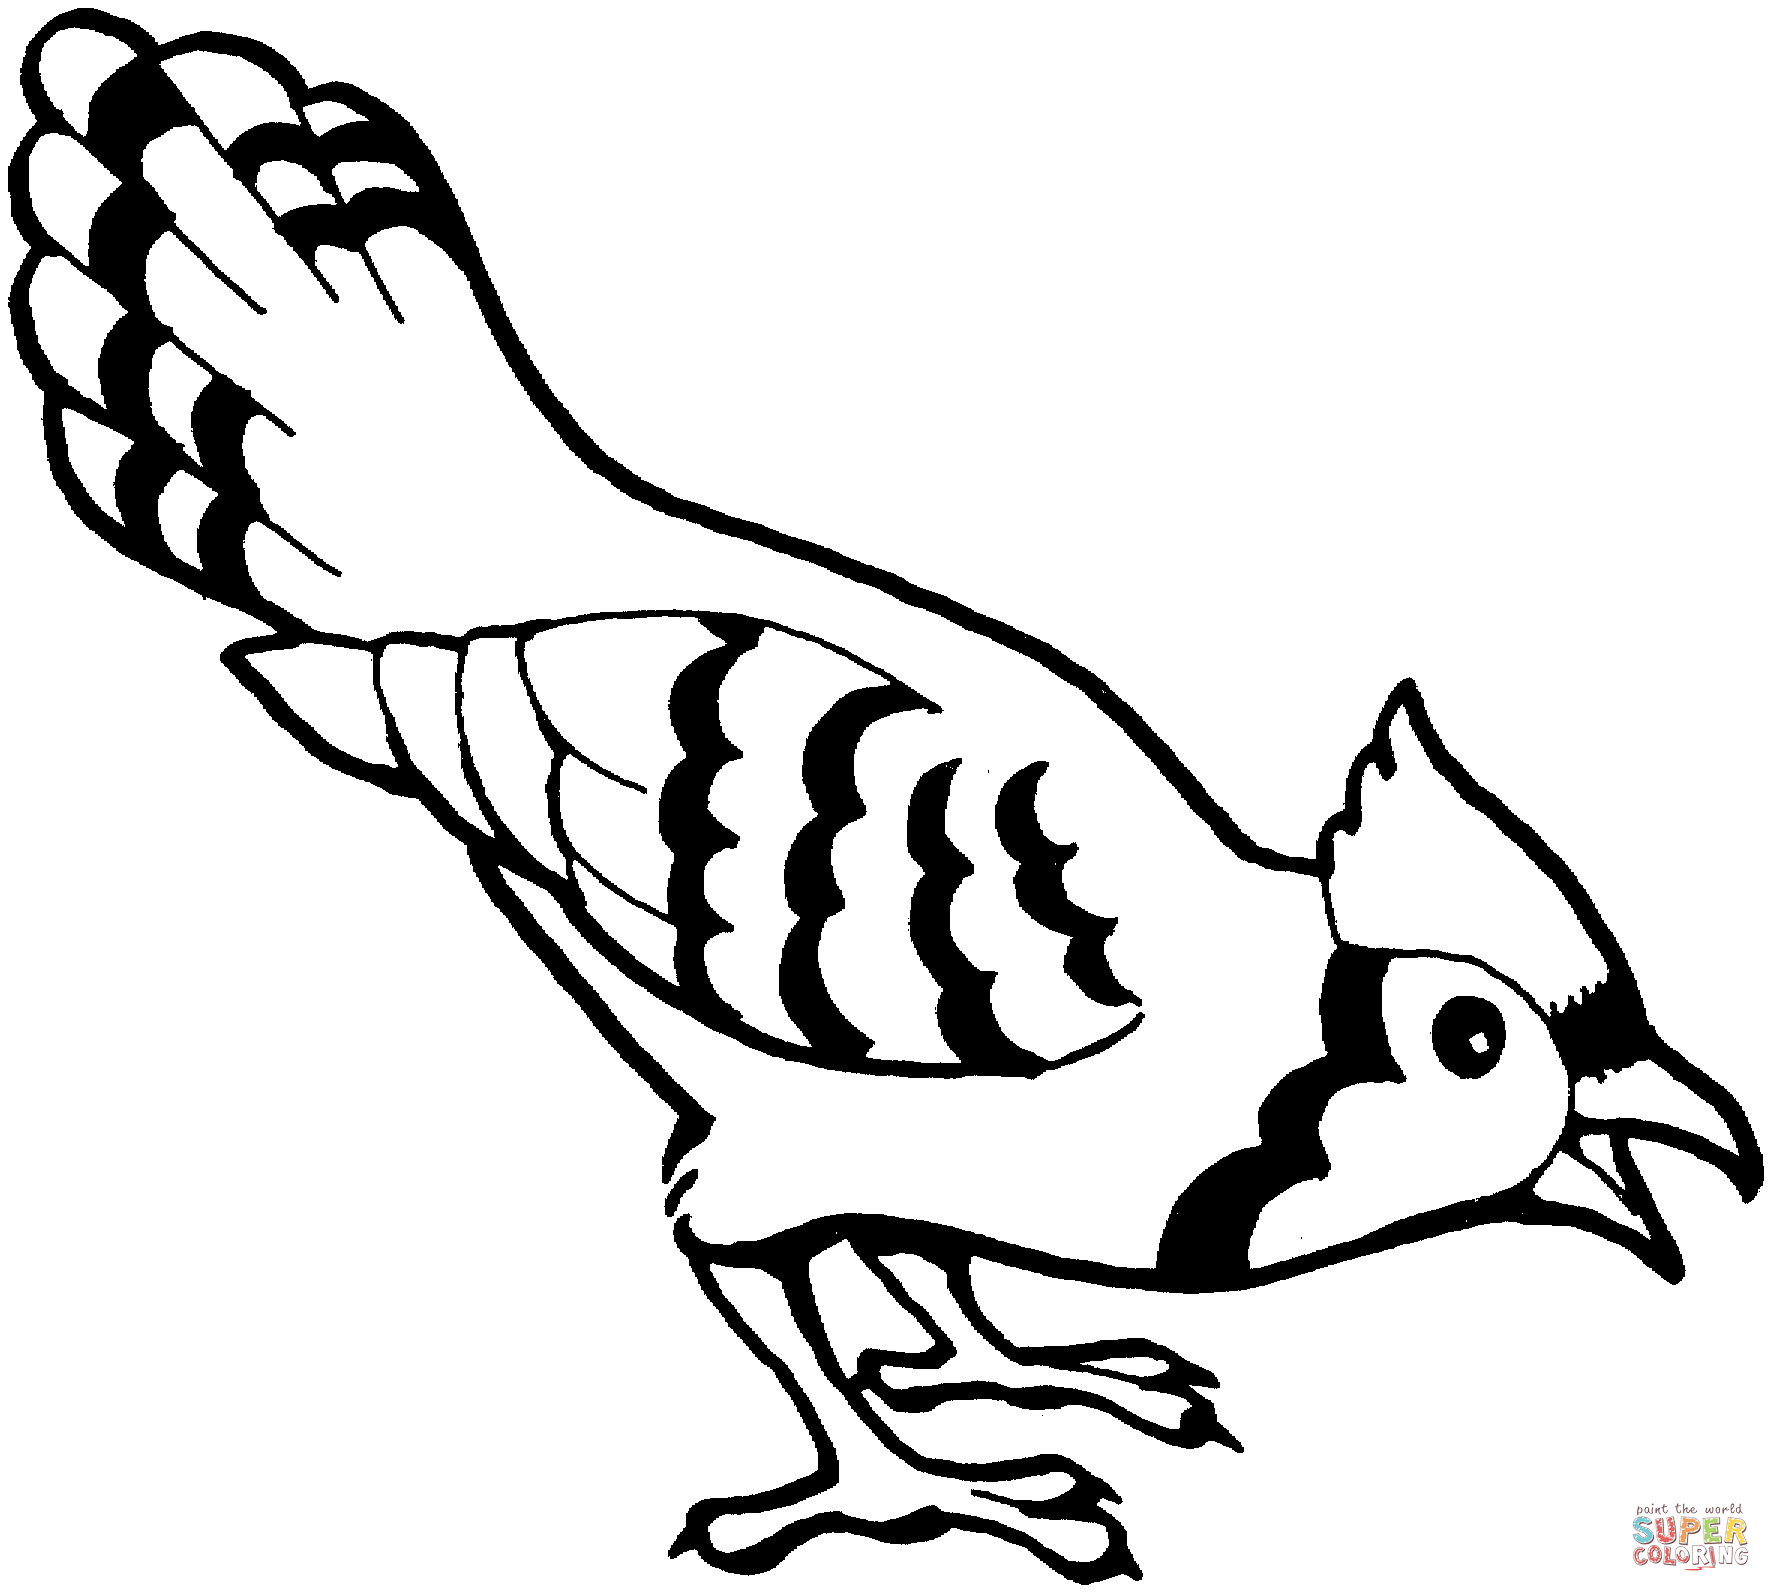 Blue Jay clipart #4, Download drawings